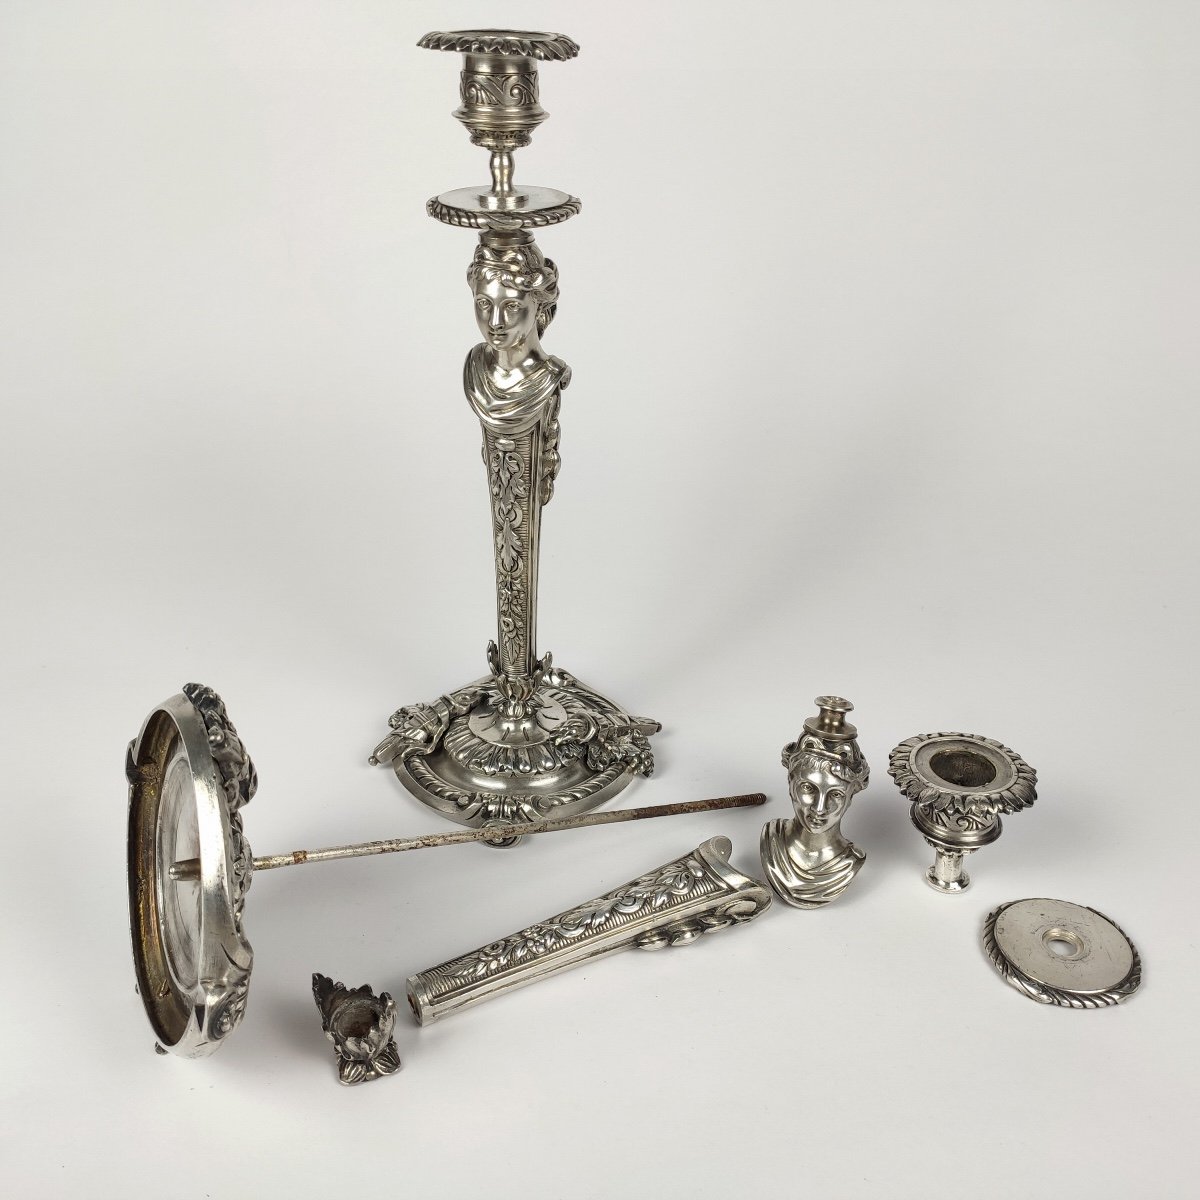 Superb Pair Of Candlesticks In Silvered Bronze, Women In Terms, Antique Style. Nineteenth Century.-photo-8